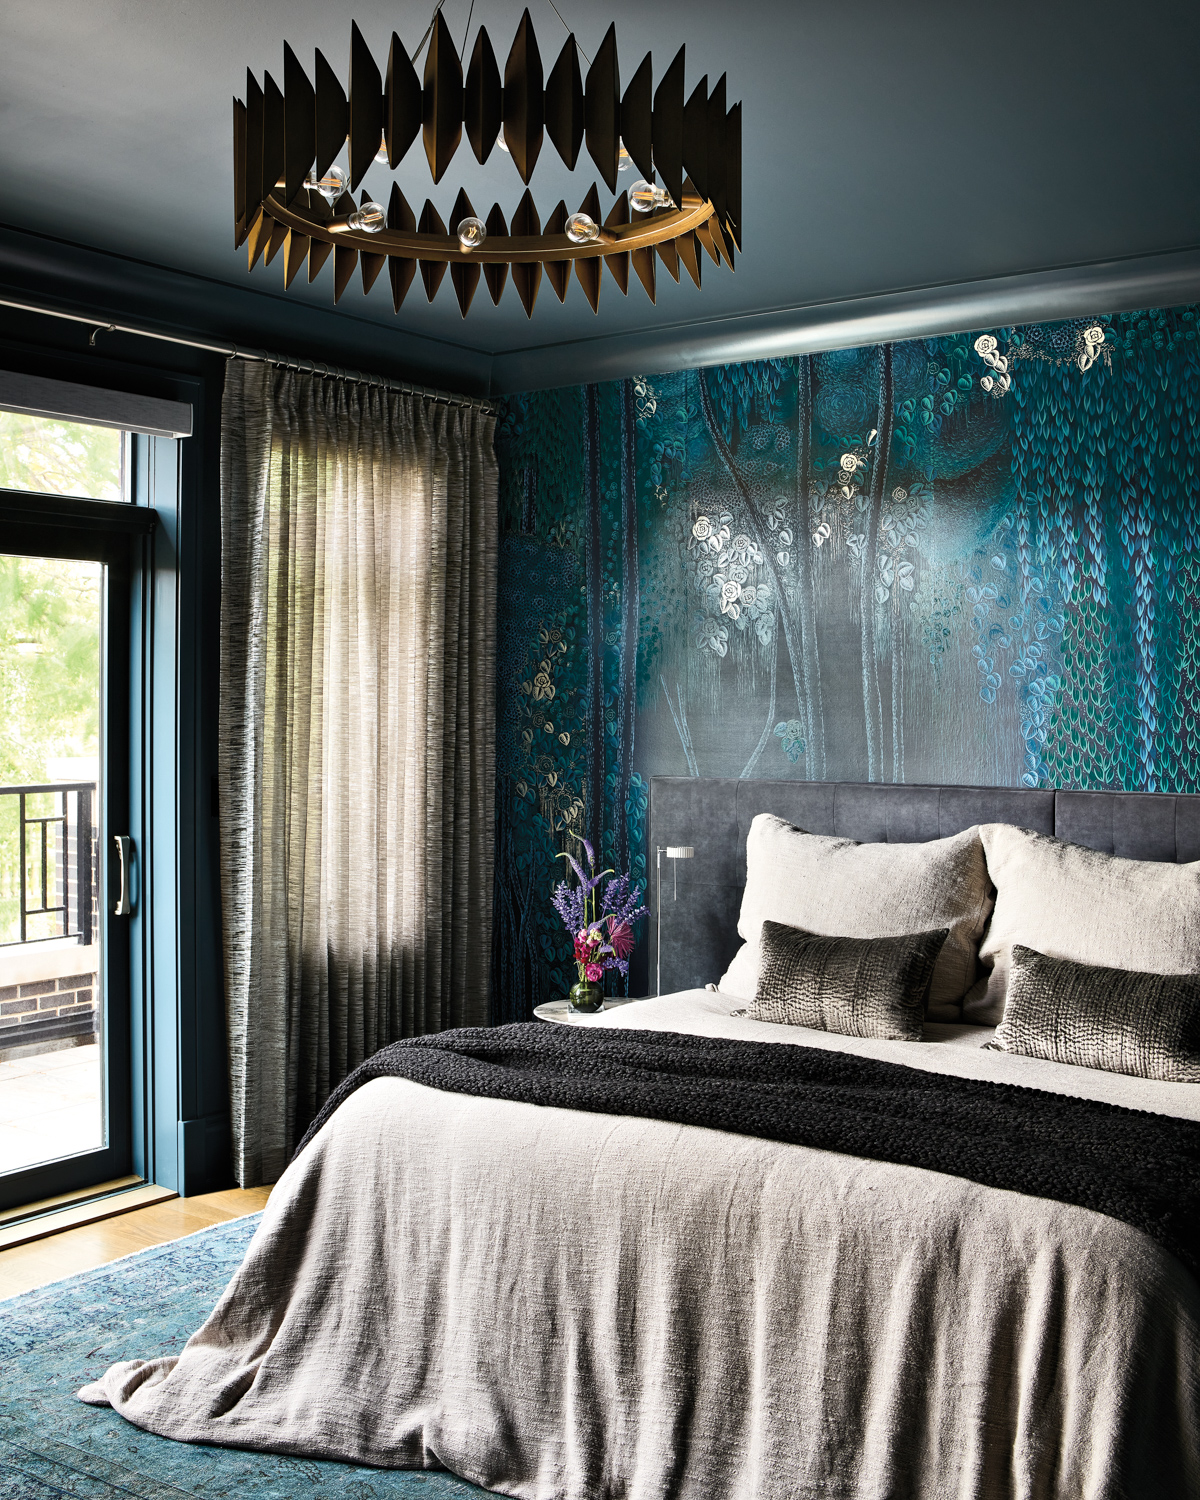 Bedroom with a whimsical patterned...